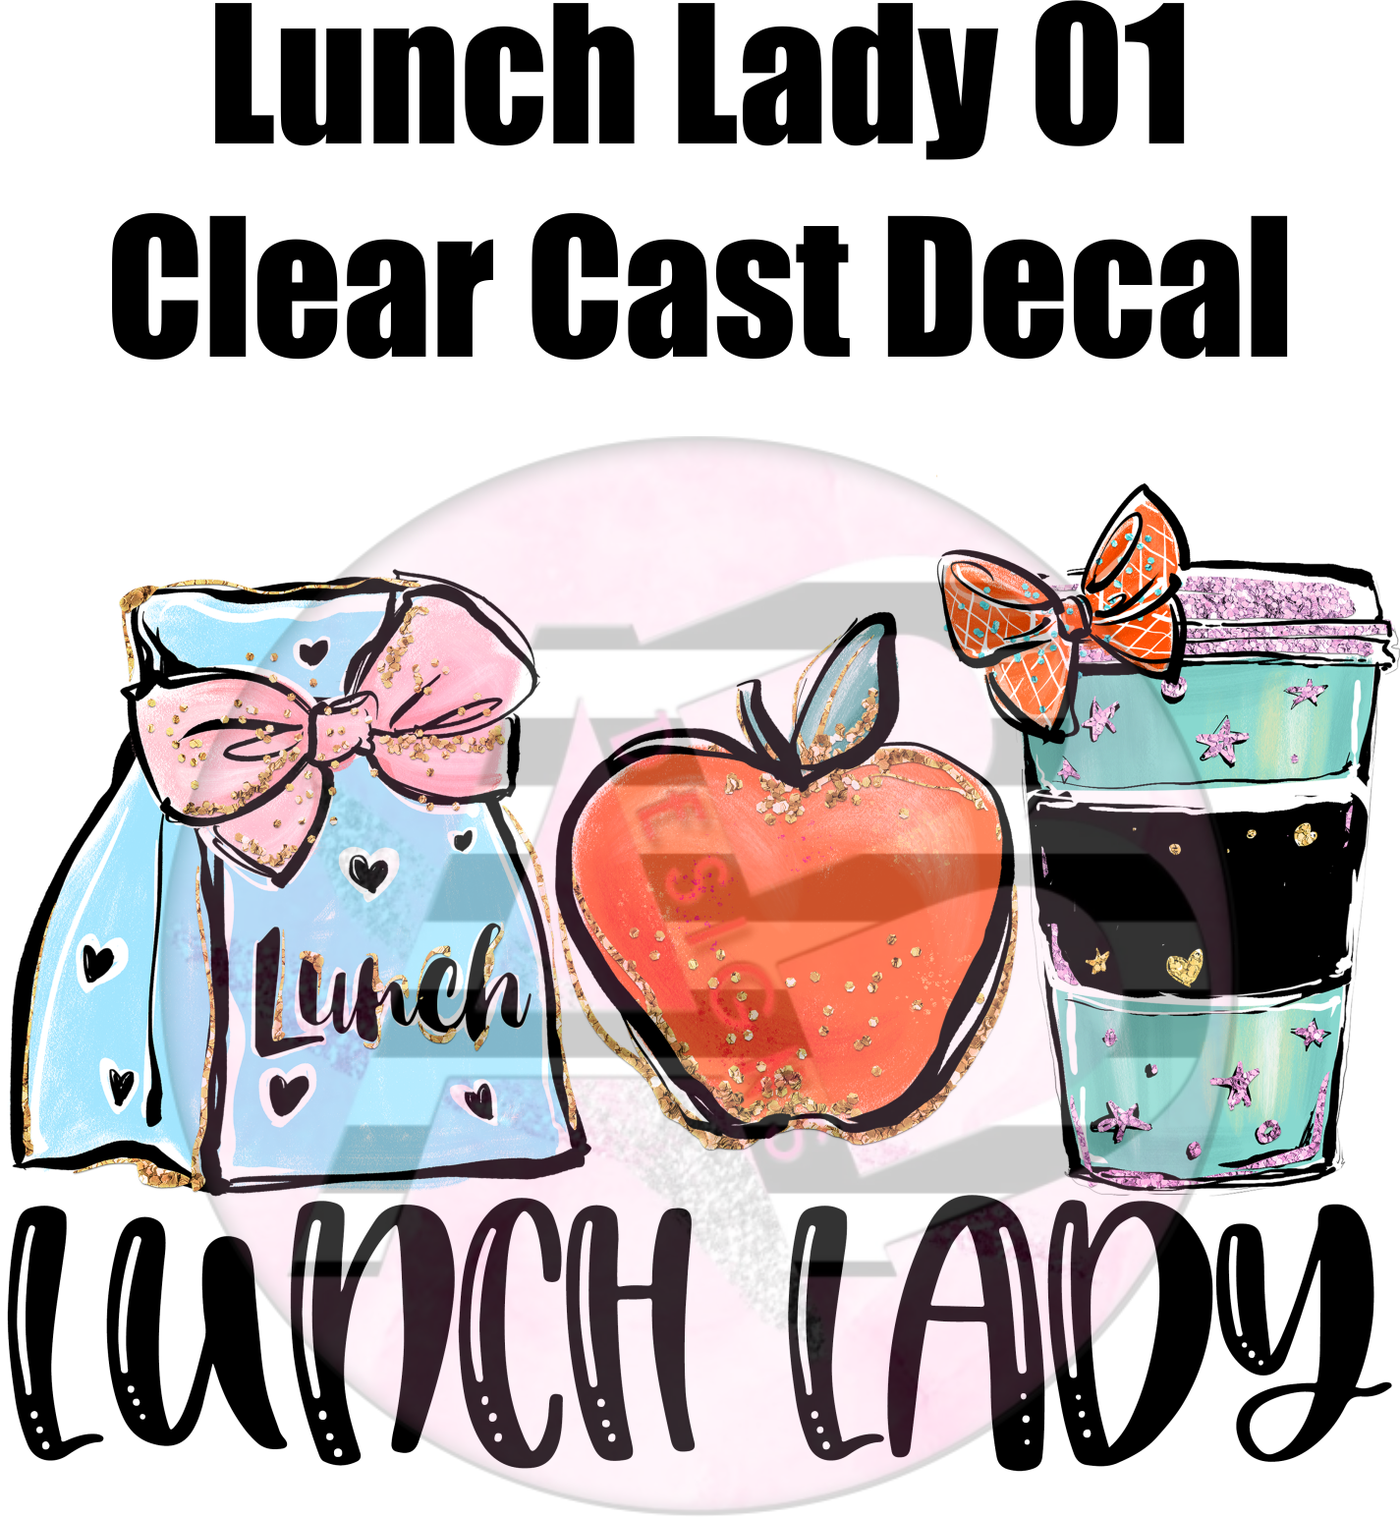 Lunch Lady 01 - Clear Cast Decal